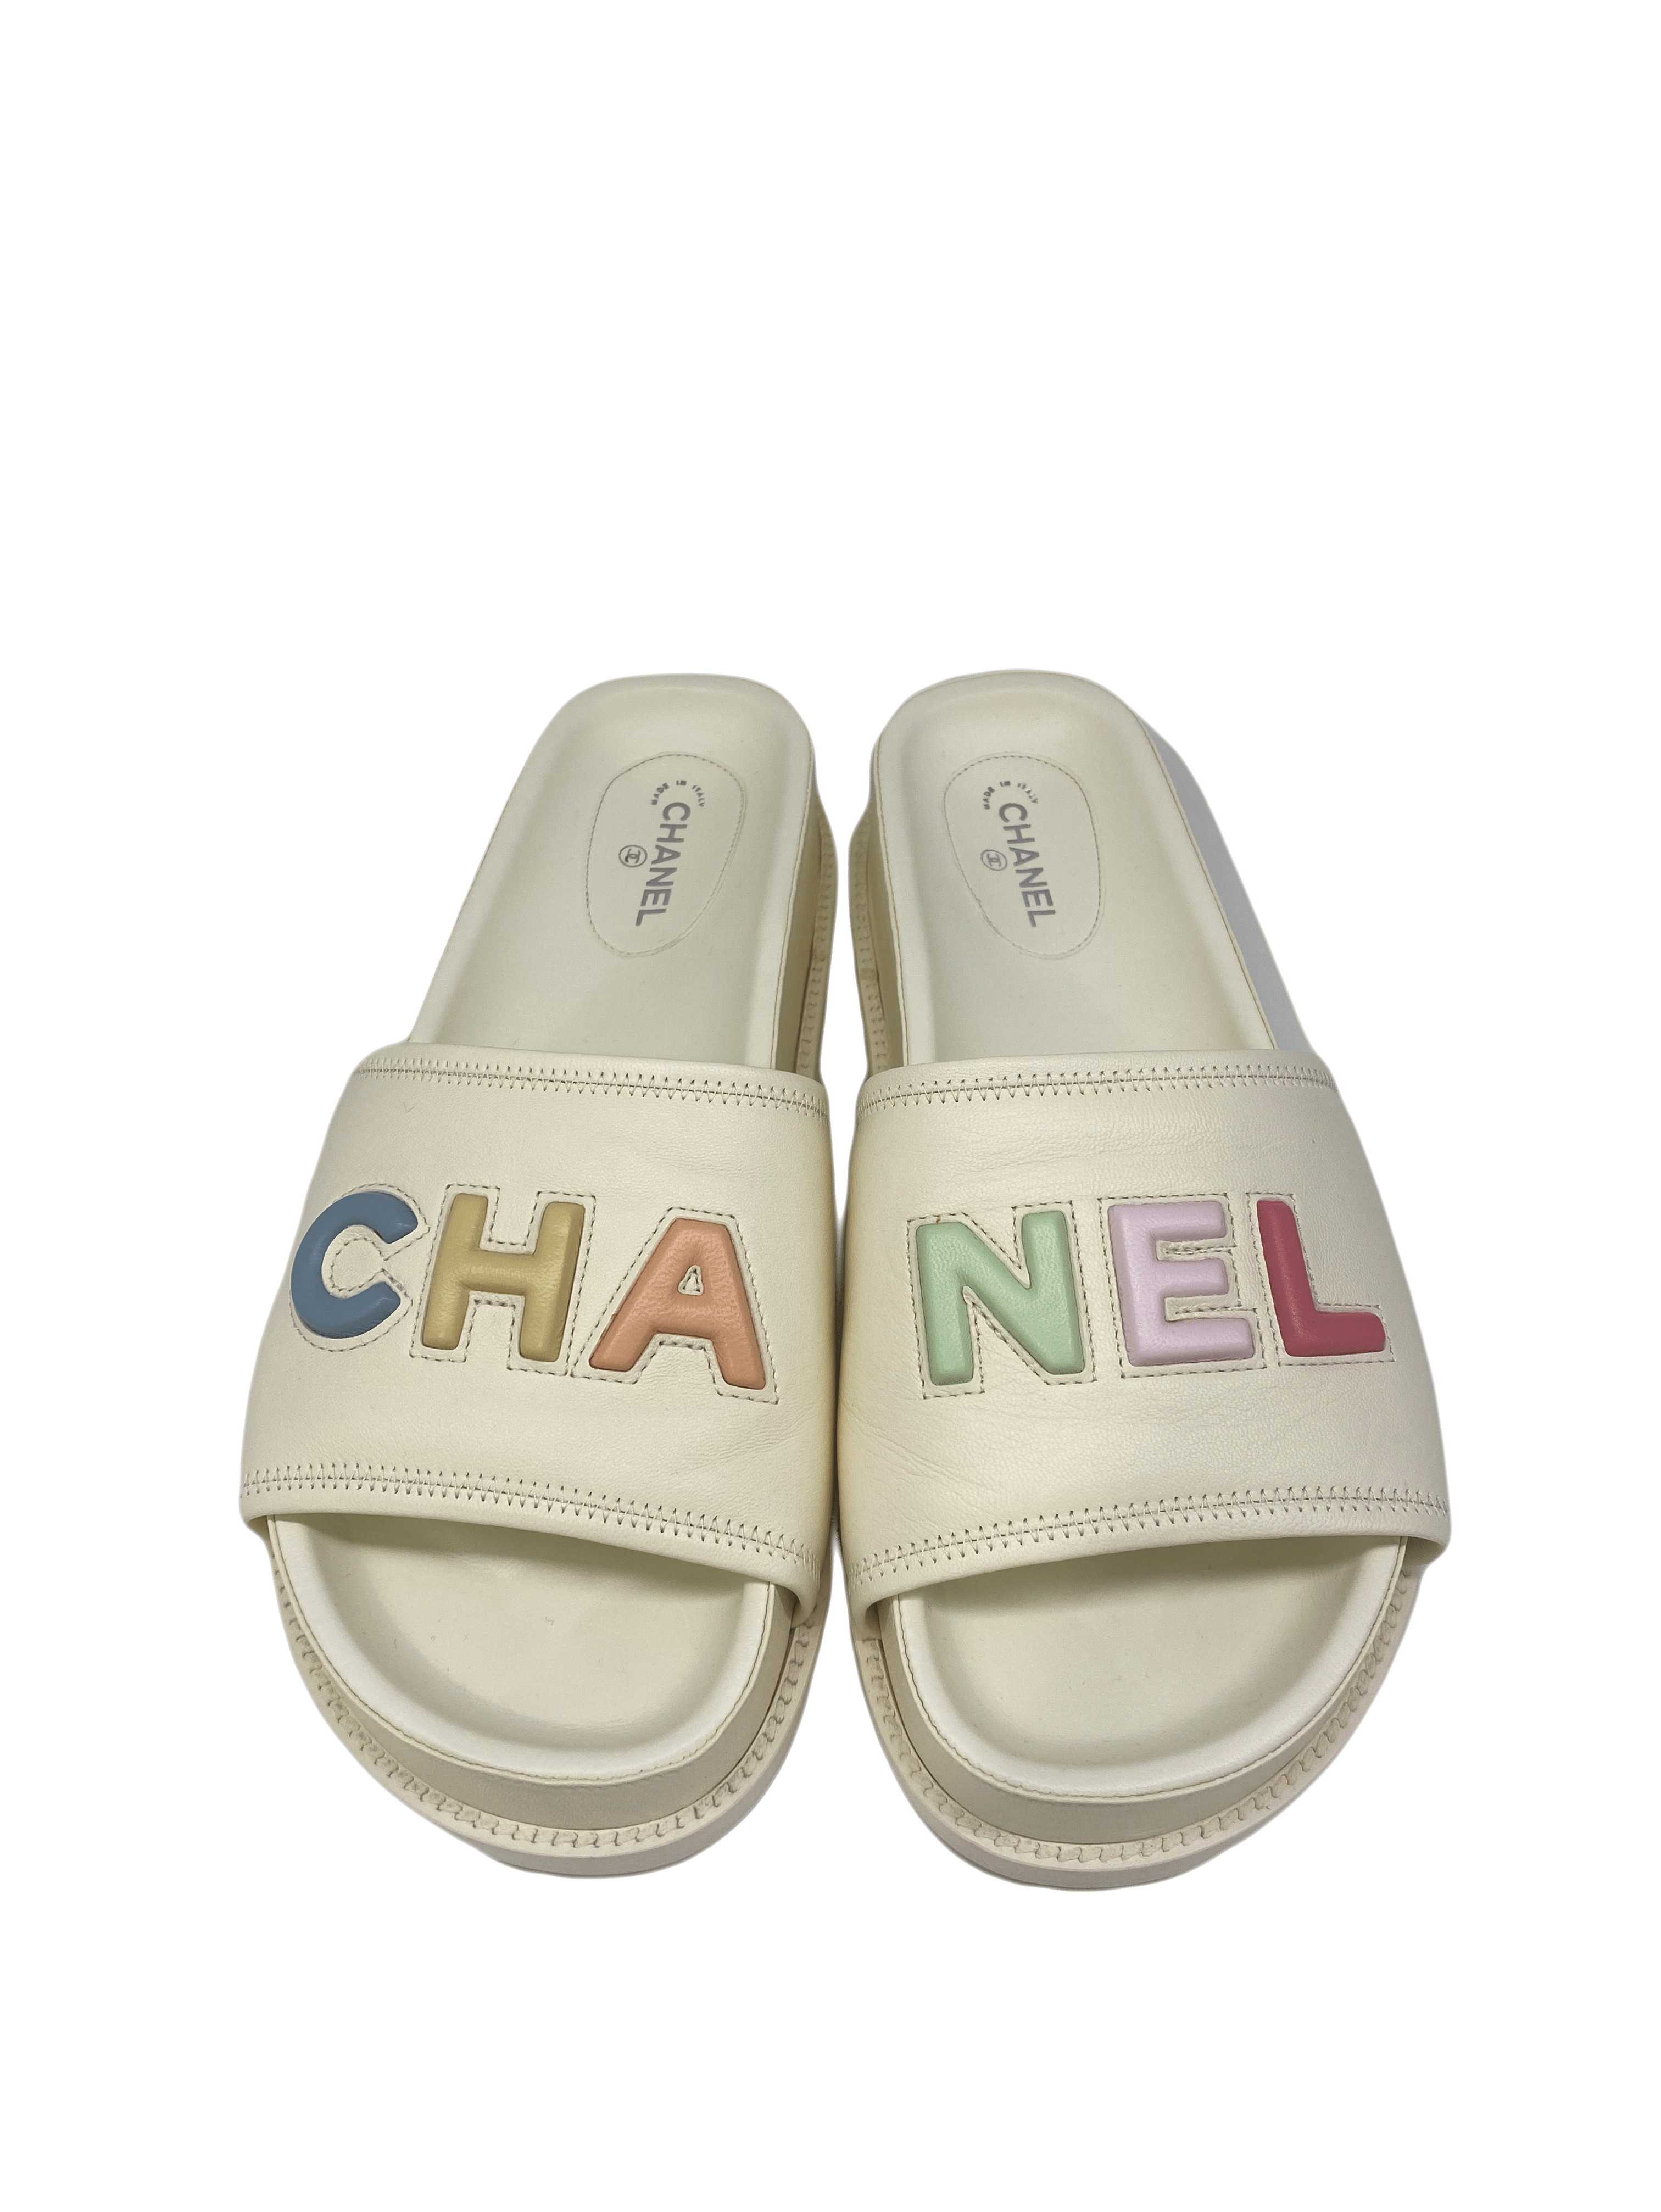 PH Luxury Consignment Chanel Rainbow and White Slides - Size 41